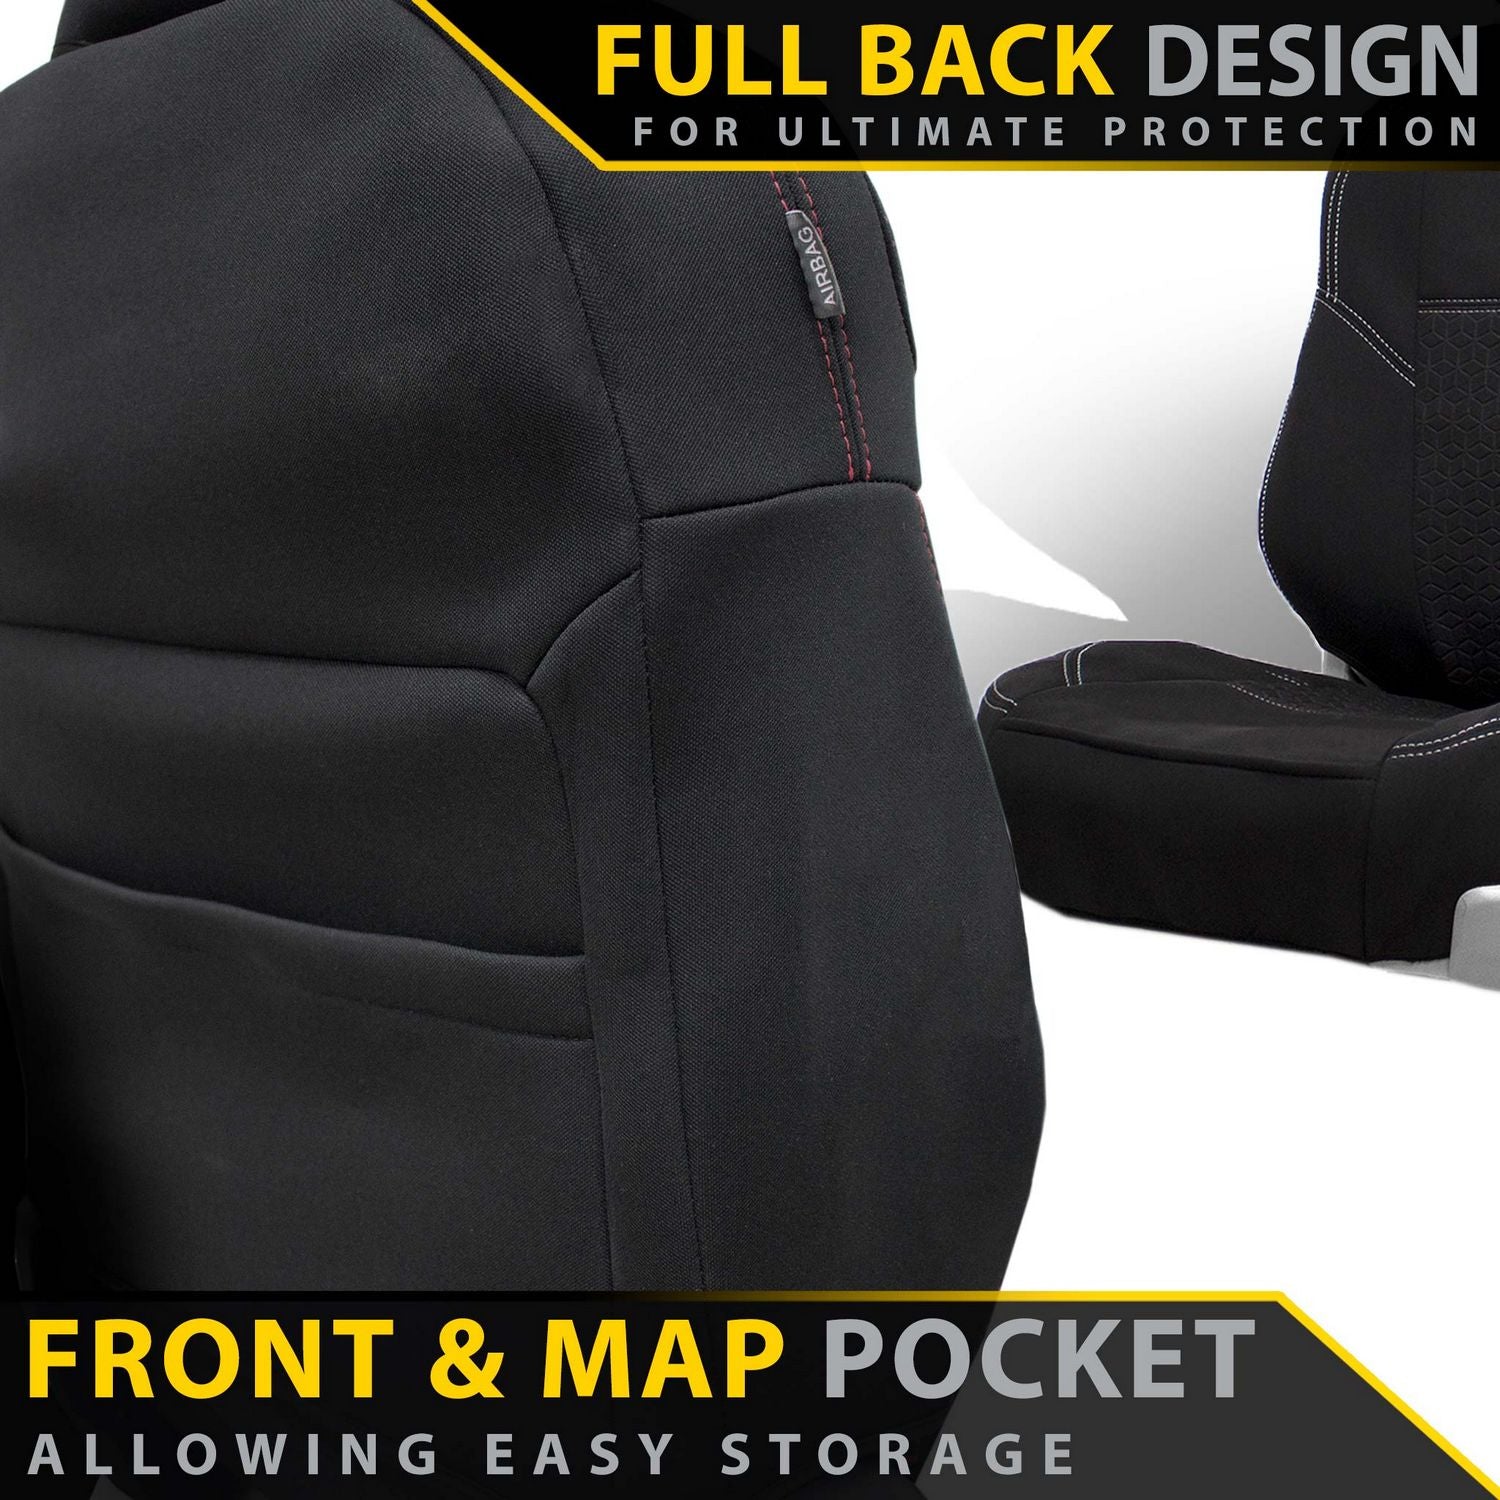 Toyota Landcruiser 300 Series GR Sport Premium Neoprene 2x Front Row Seat Covers (Made to Order)